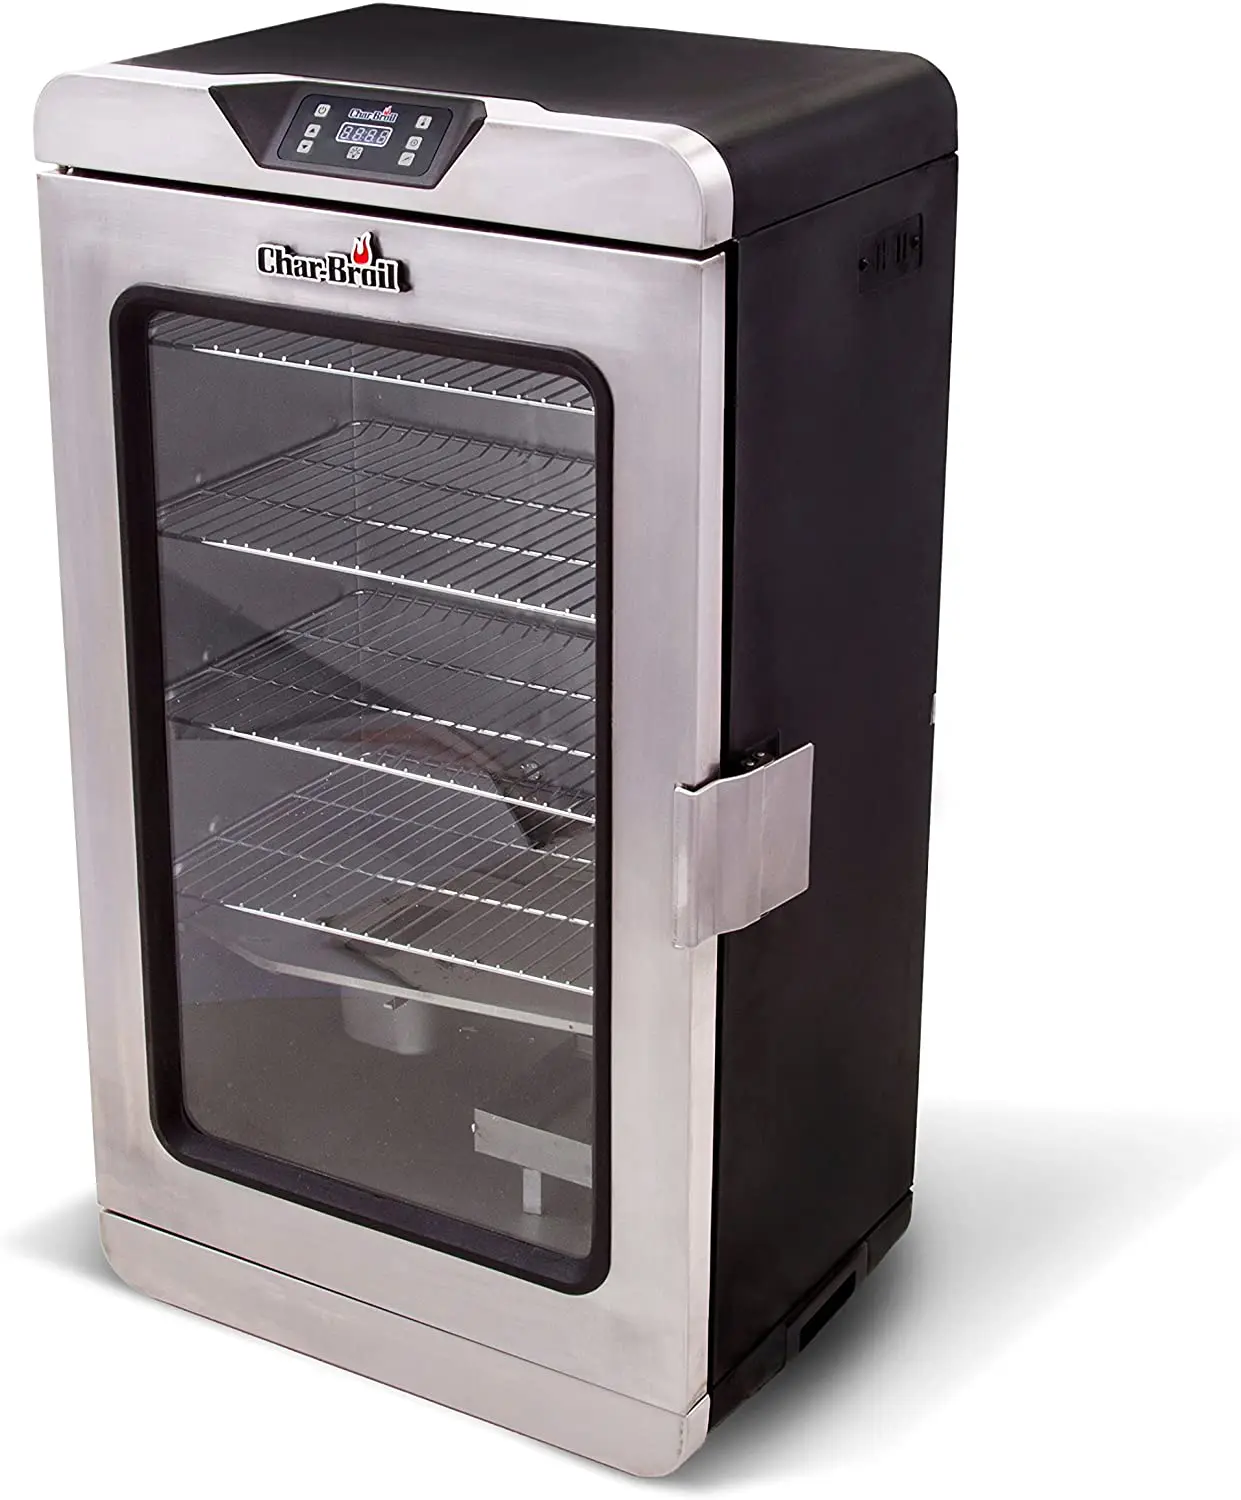 best-electric-smoker-to-buy-Char-Broil-Deluxe-Digital-Electric-Smoker-1000-Square-Inch